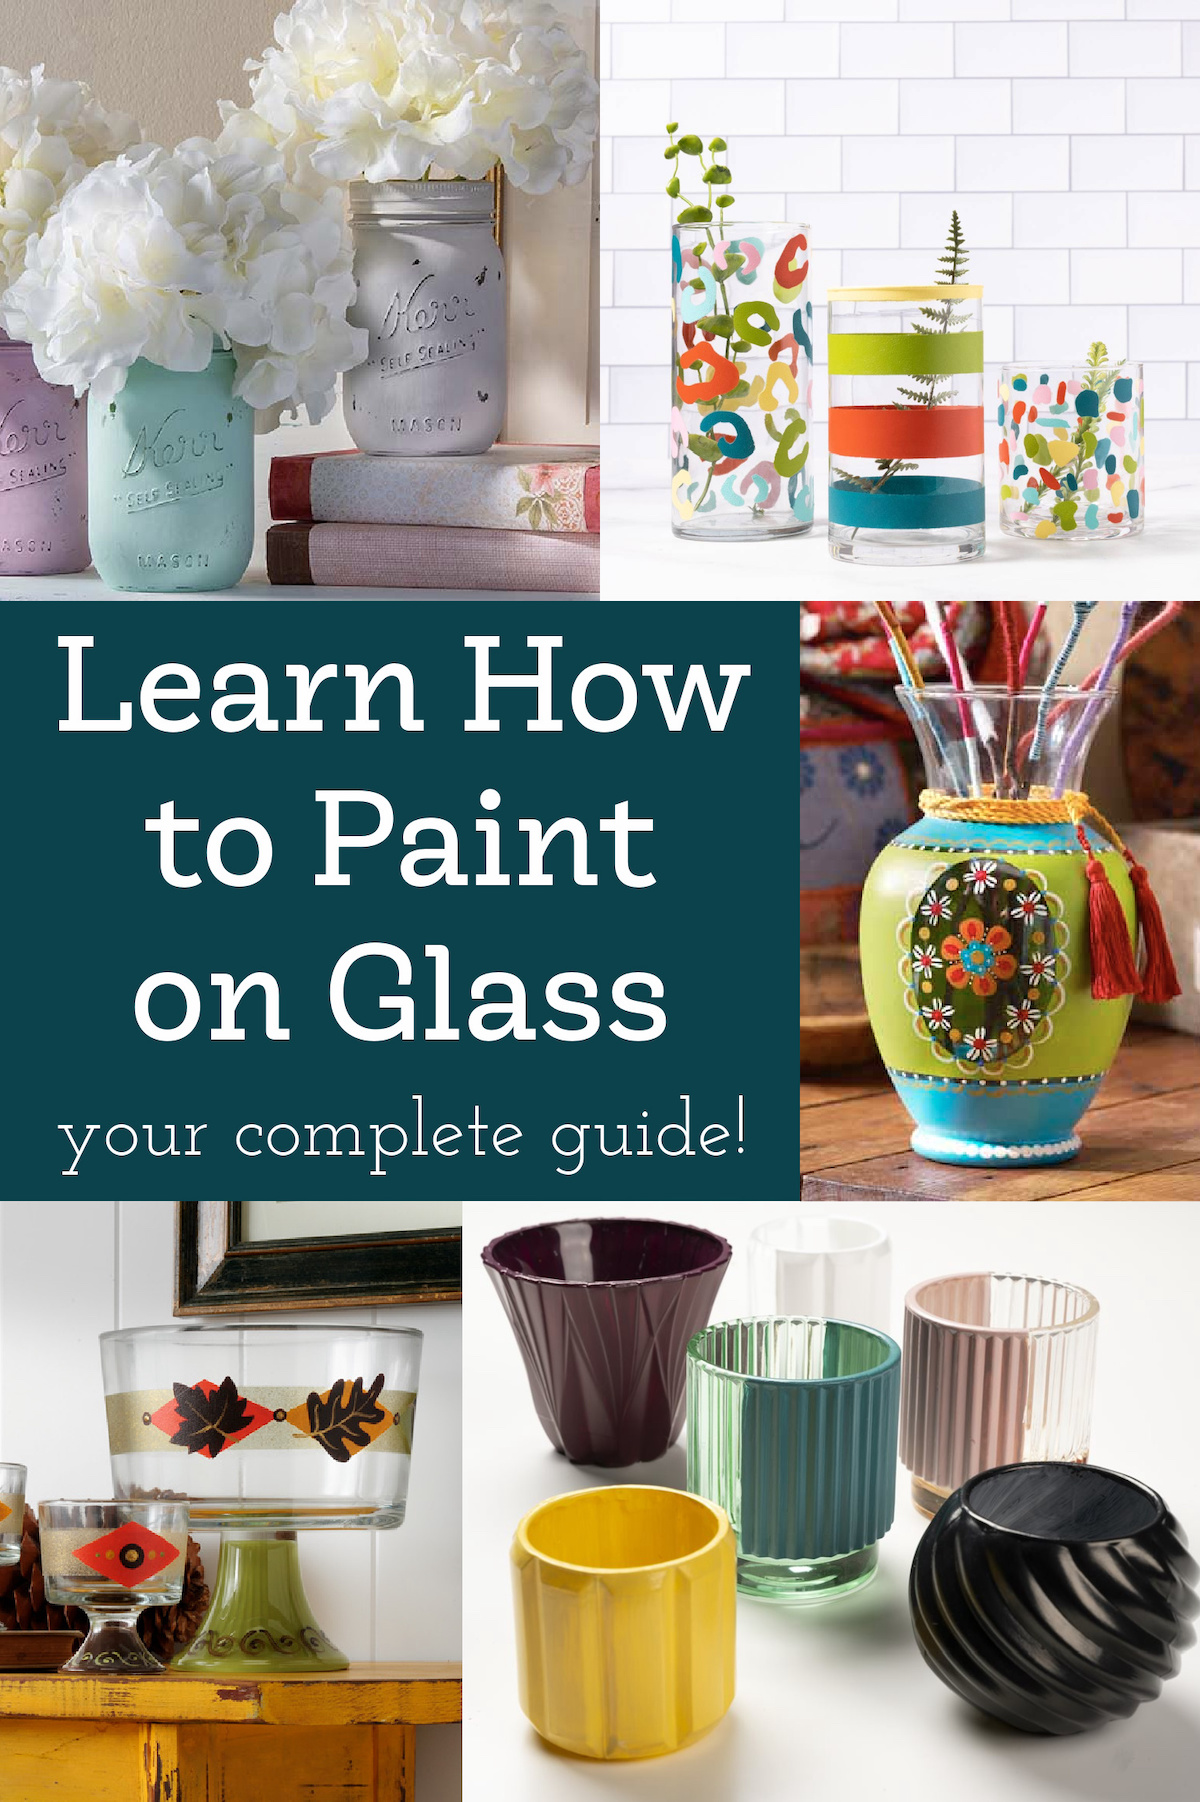 The Complete Guide to Glass Painting for Beginners